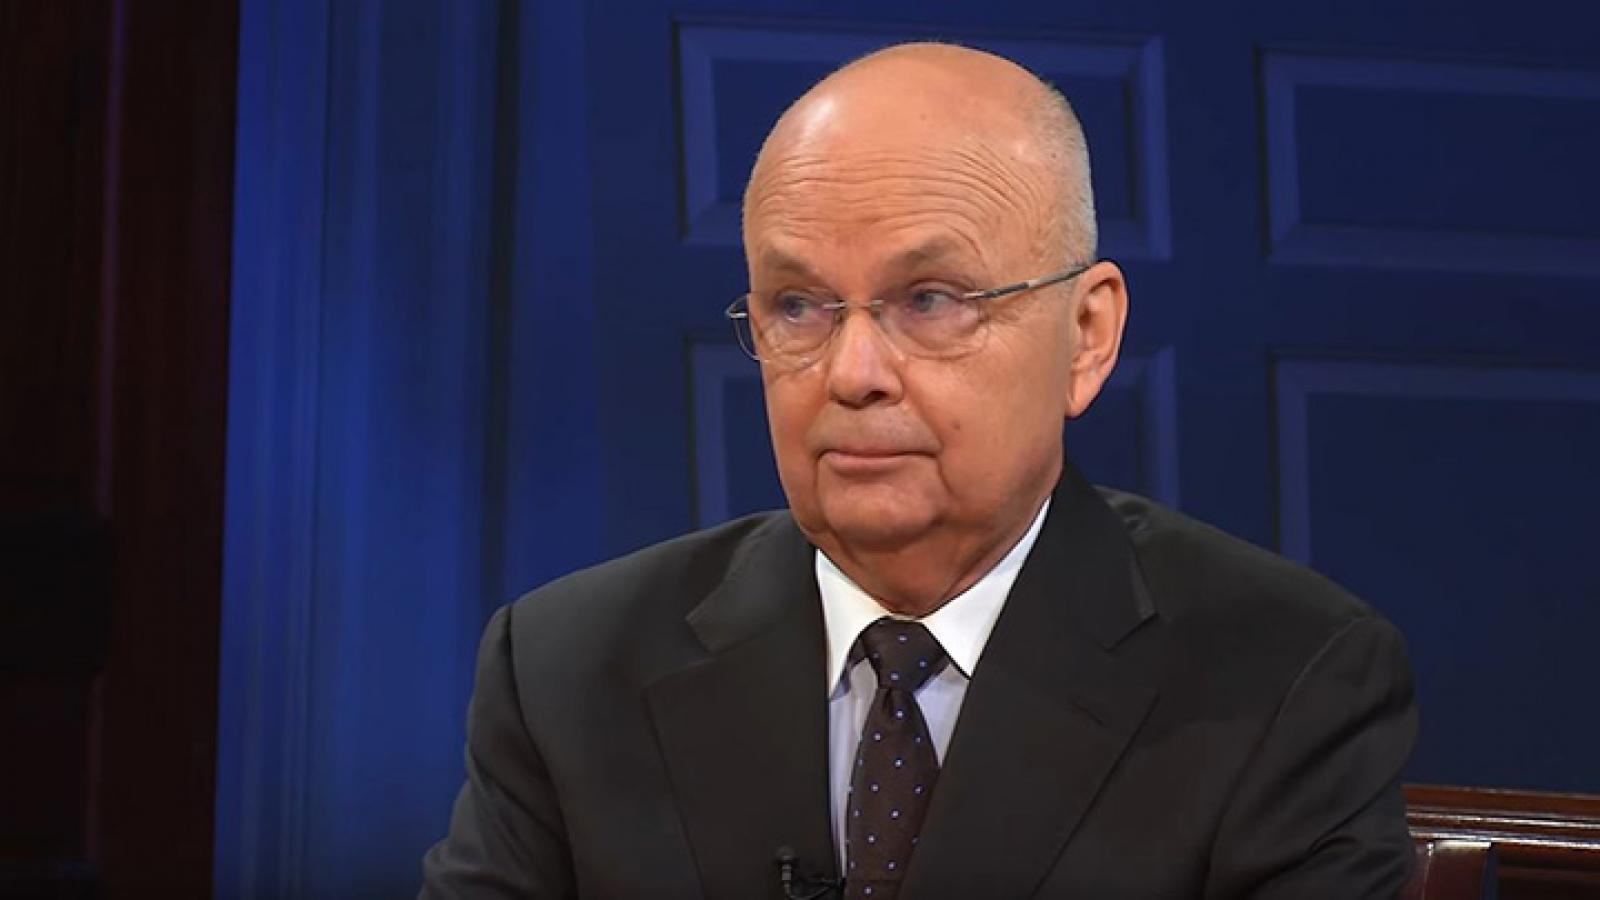 Former Air Force General Michael Hayden explains why the intelligence community erred in evaluating weapons of mass destruction in Iraq